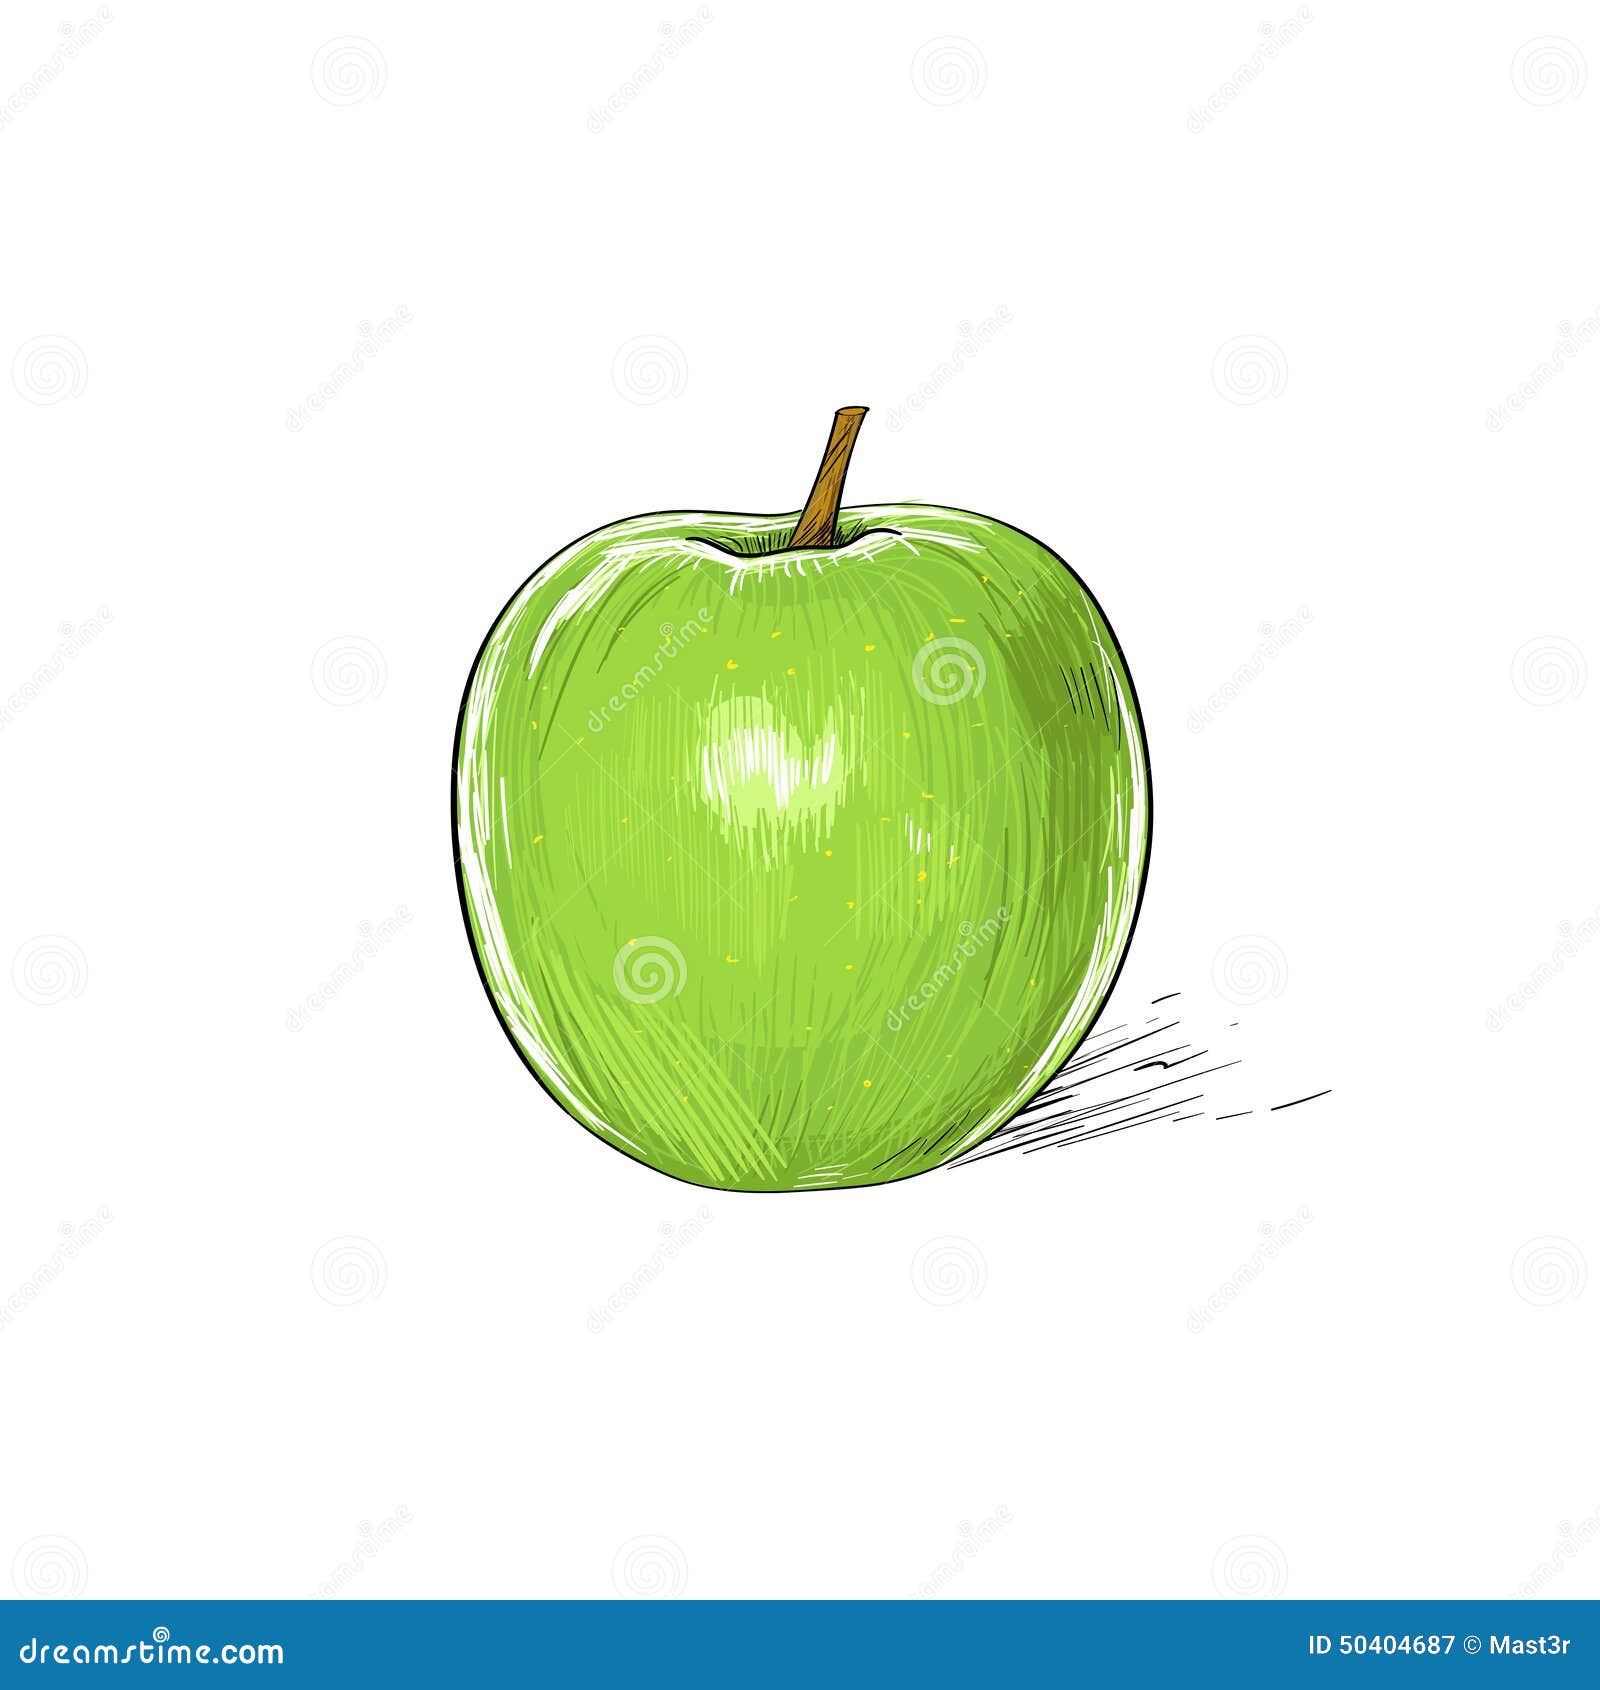 Sketched Apple Stock Photos and Images - 123RF